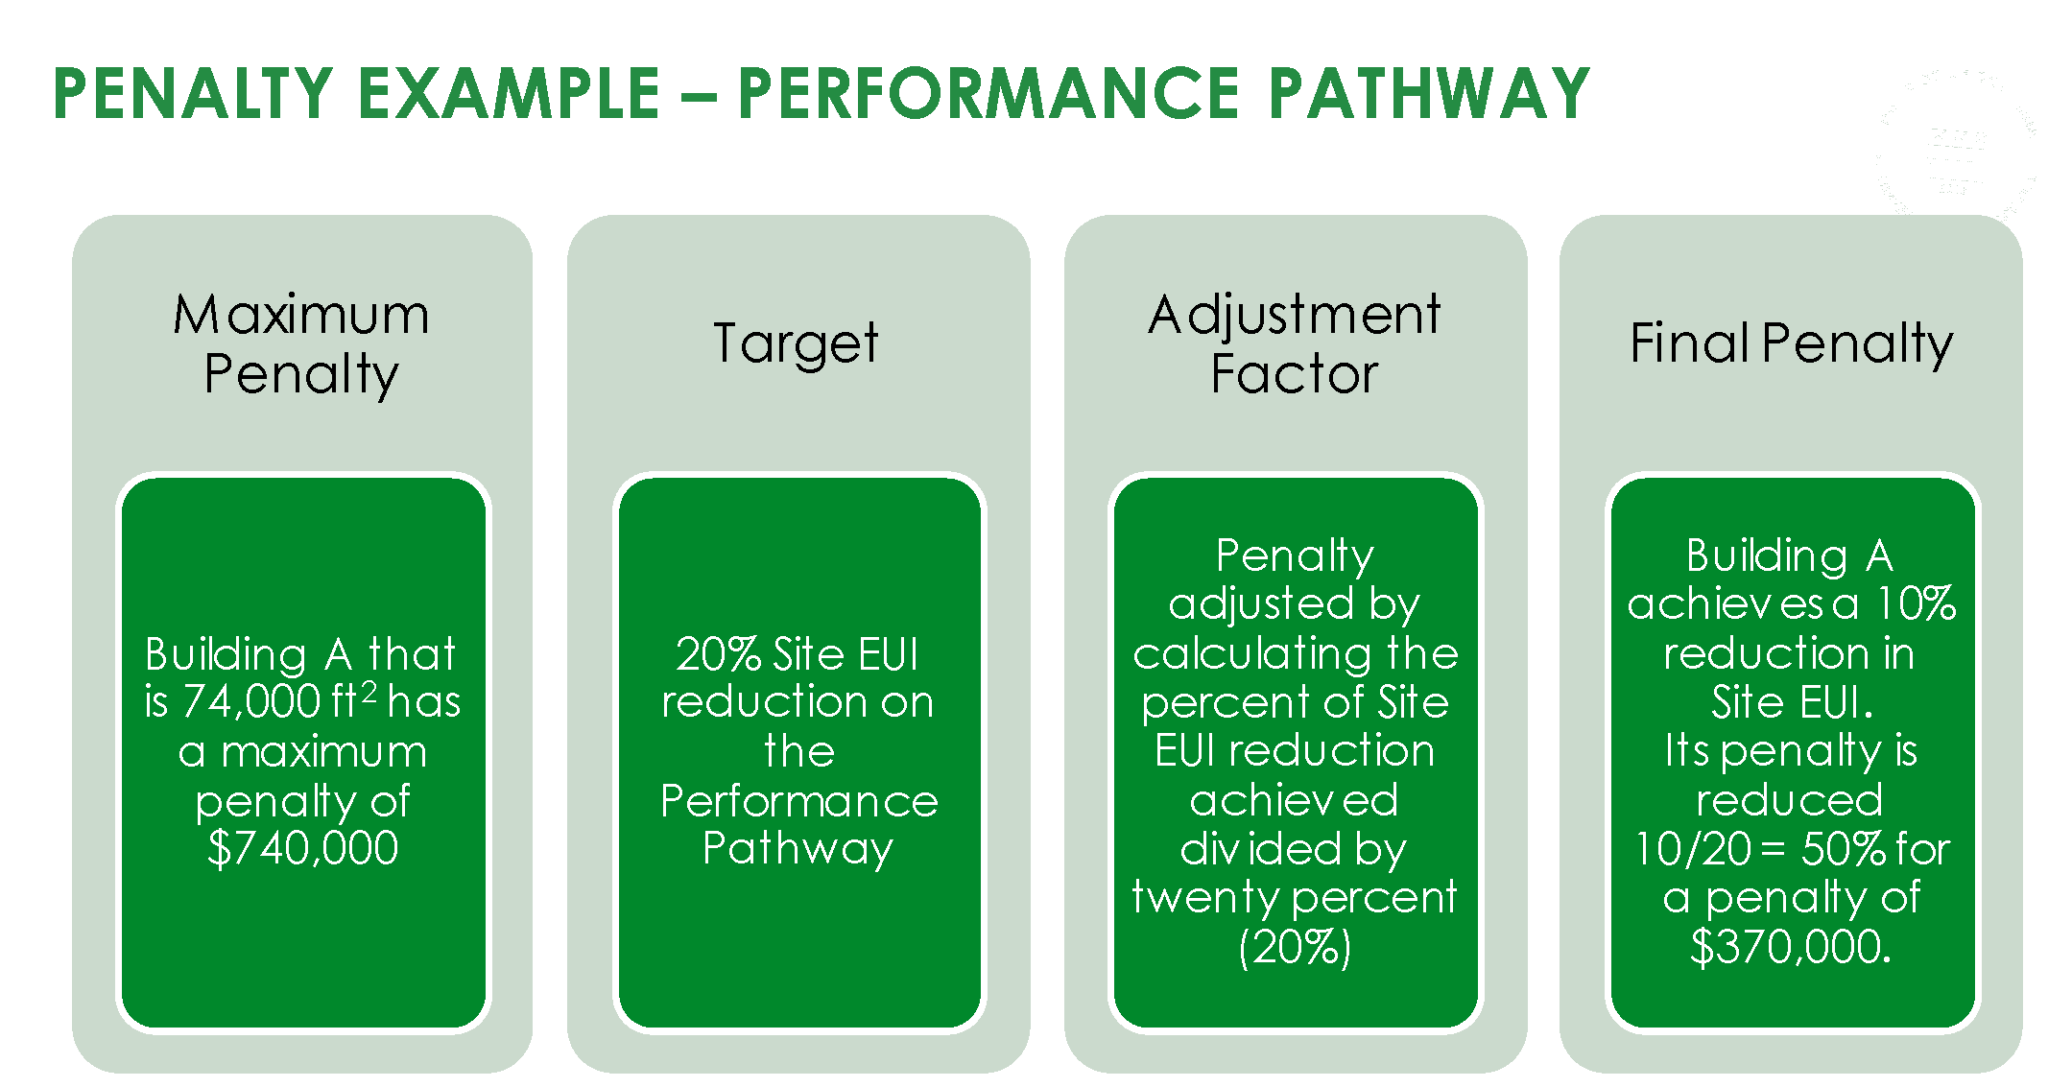 DC BEPS Penalty Performance Pathway Example